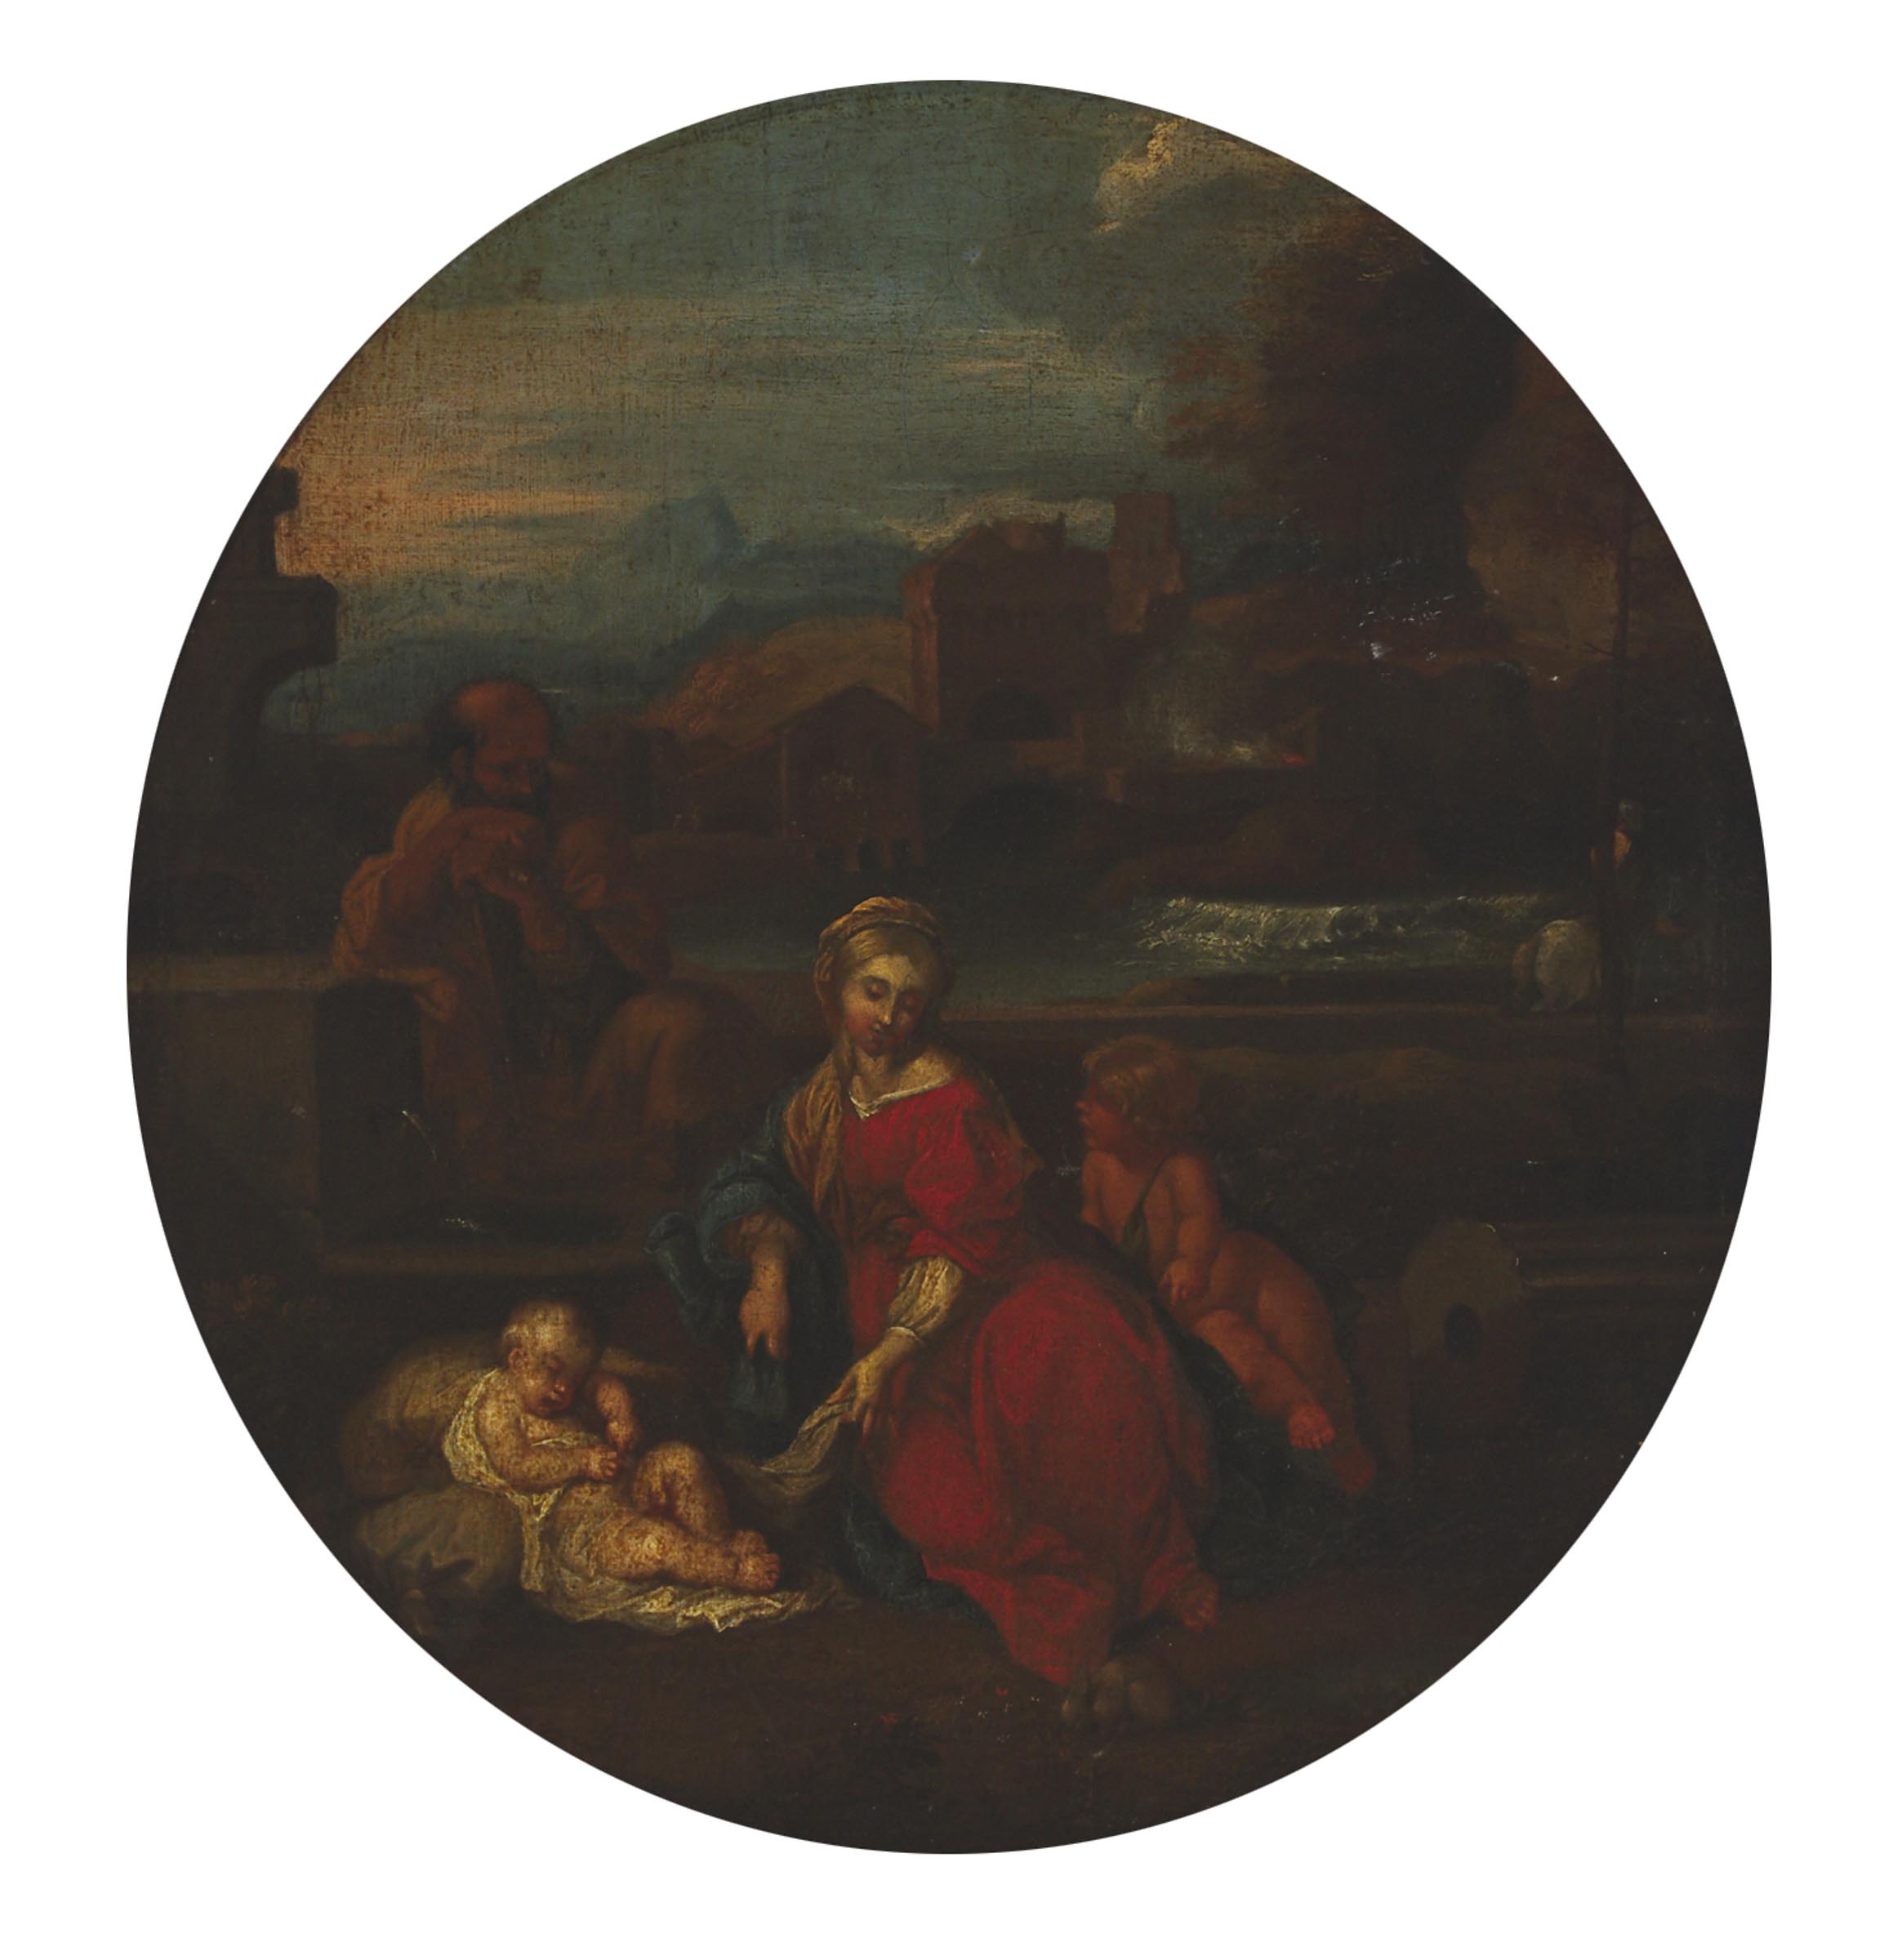 Manner of Nicolas Poussin (1594-1665)